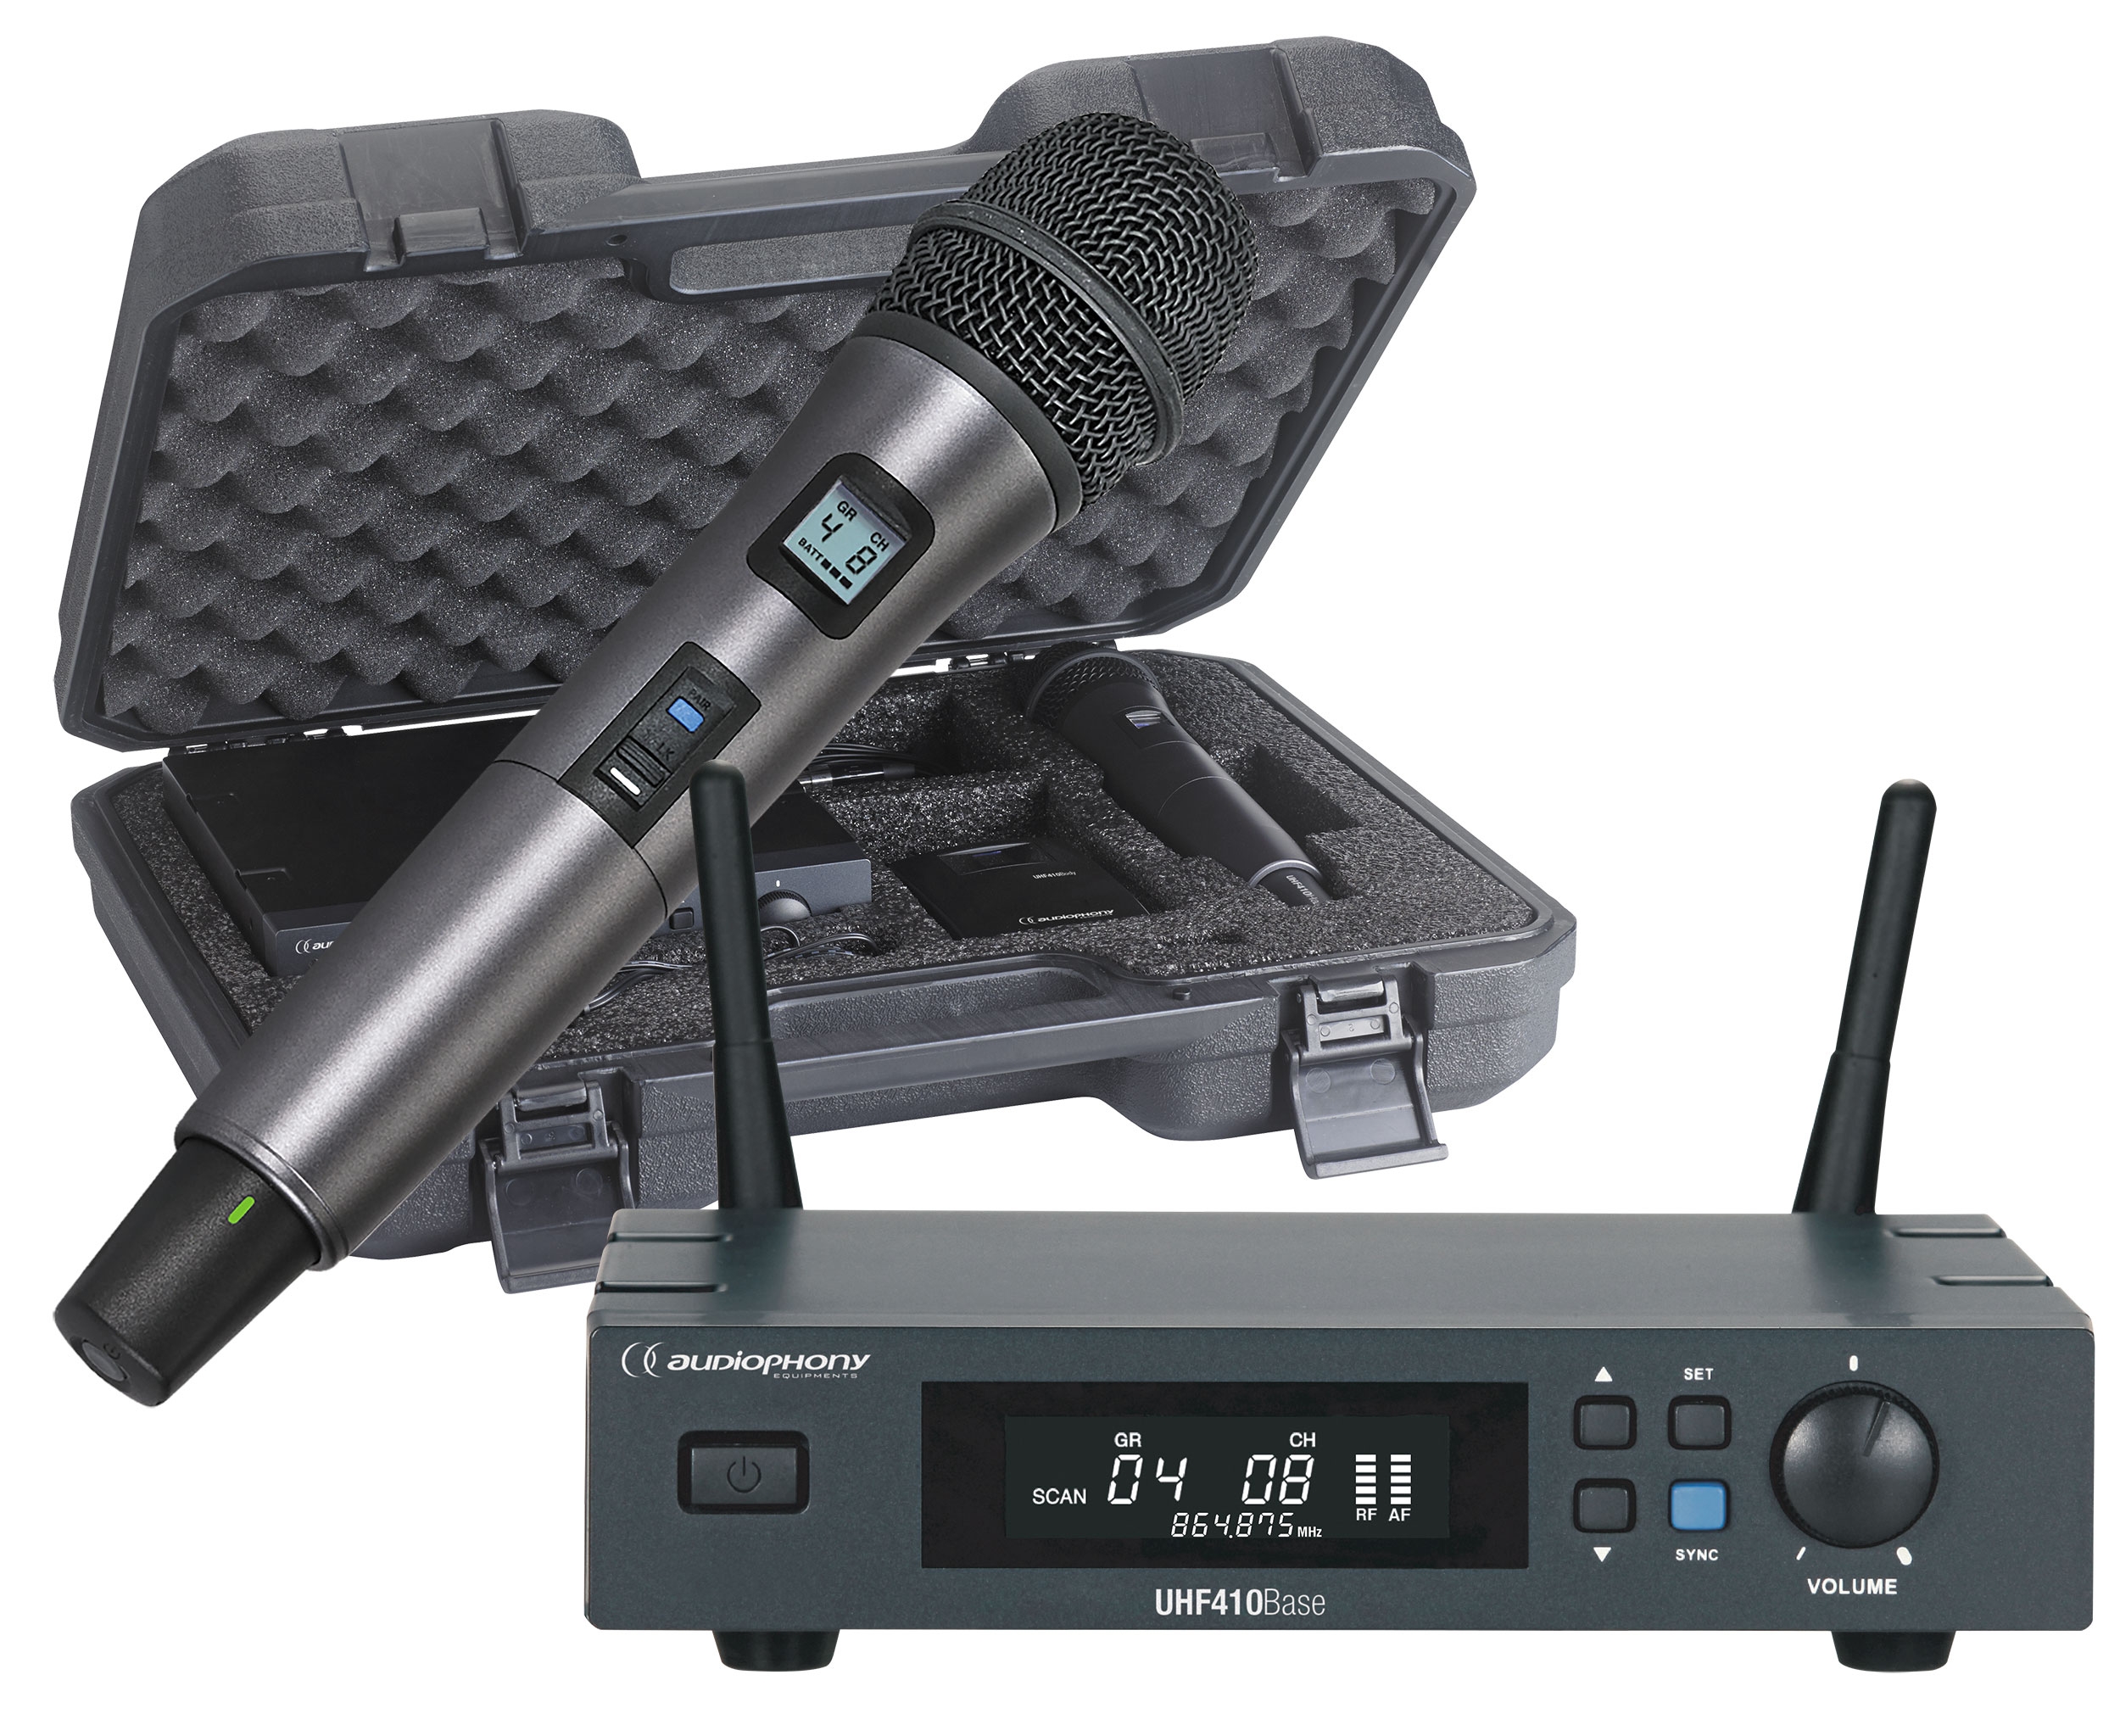 UHF receiver pack with hand microphone and case - 500MHz range